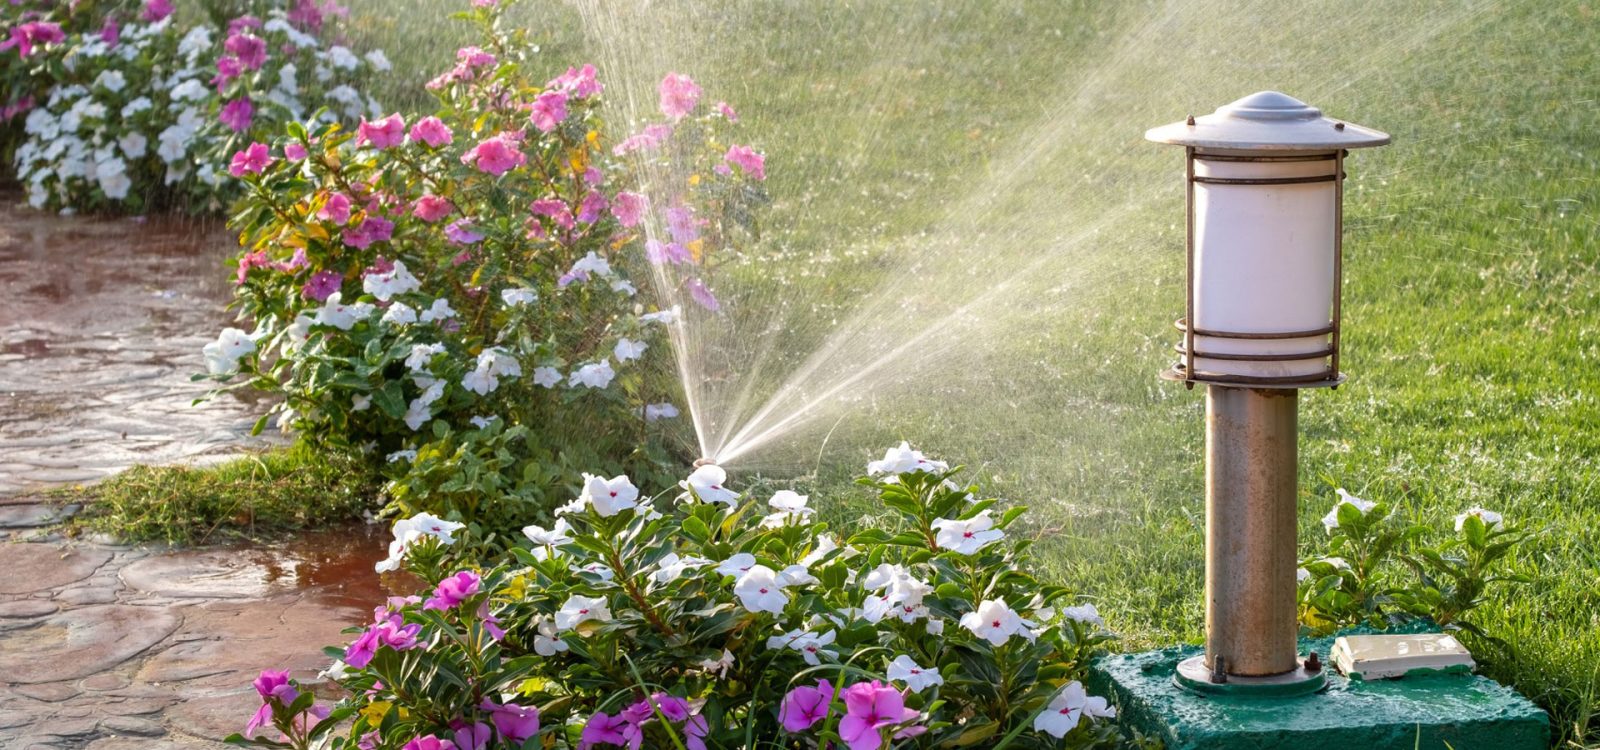 Ready to upgrade to a greener, more efficient watering system?